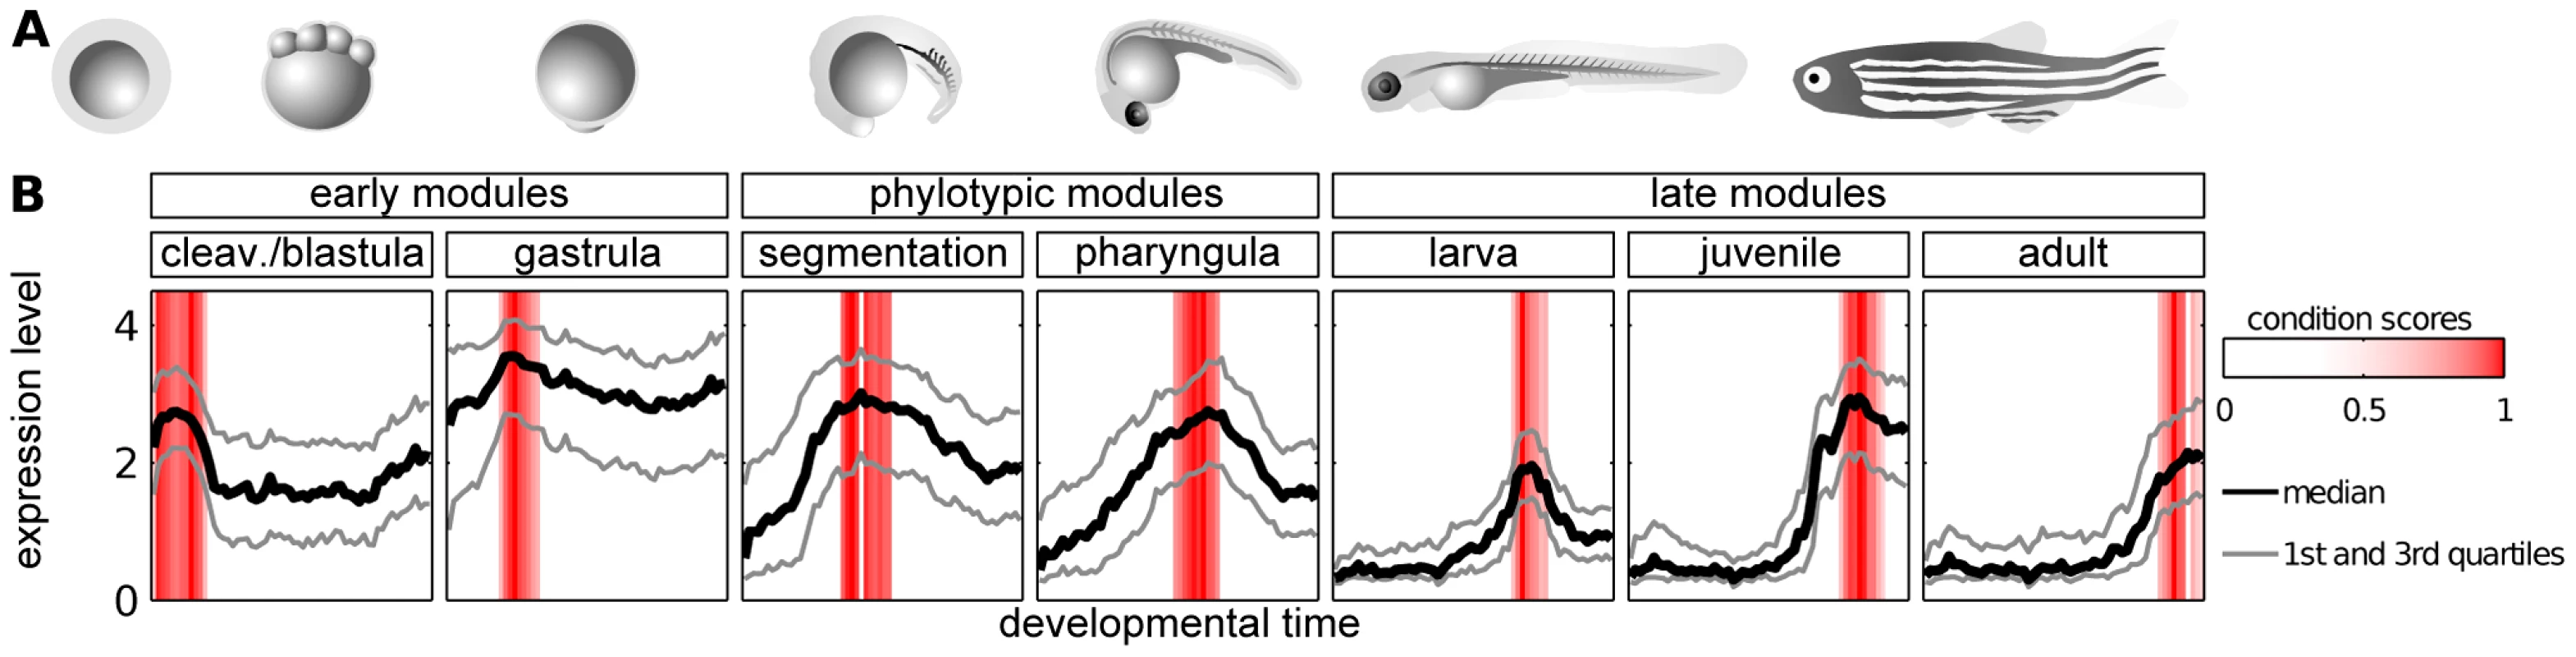 Modules of genes with time-specific expression during zebrafish development.